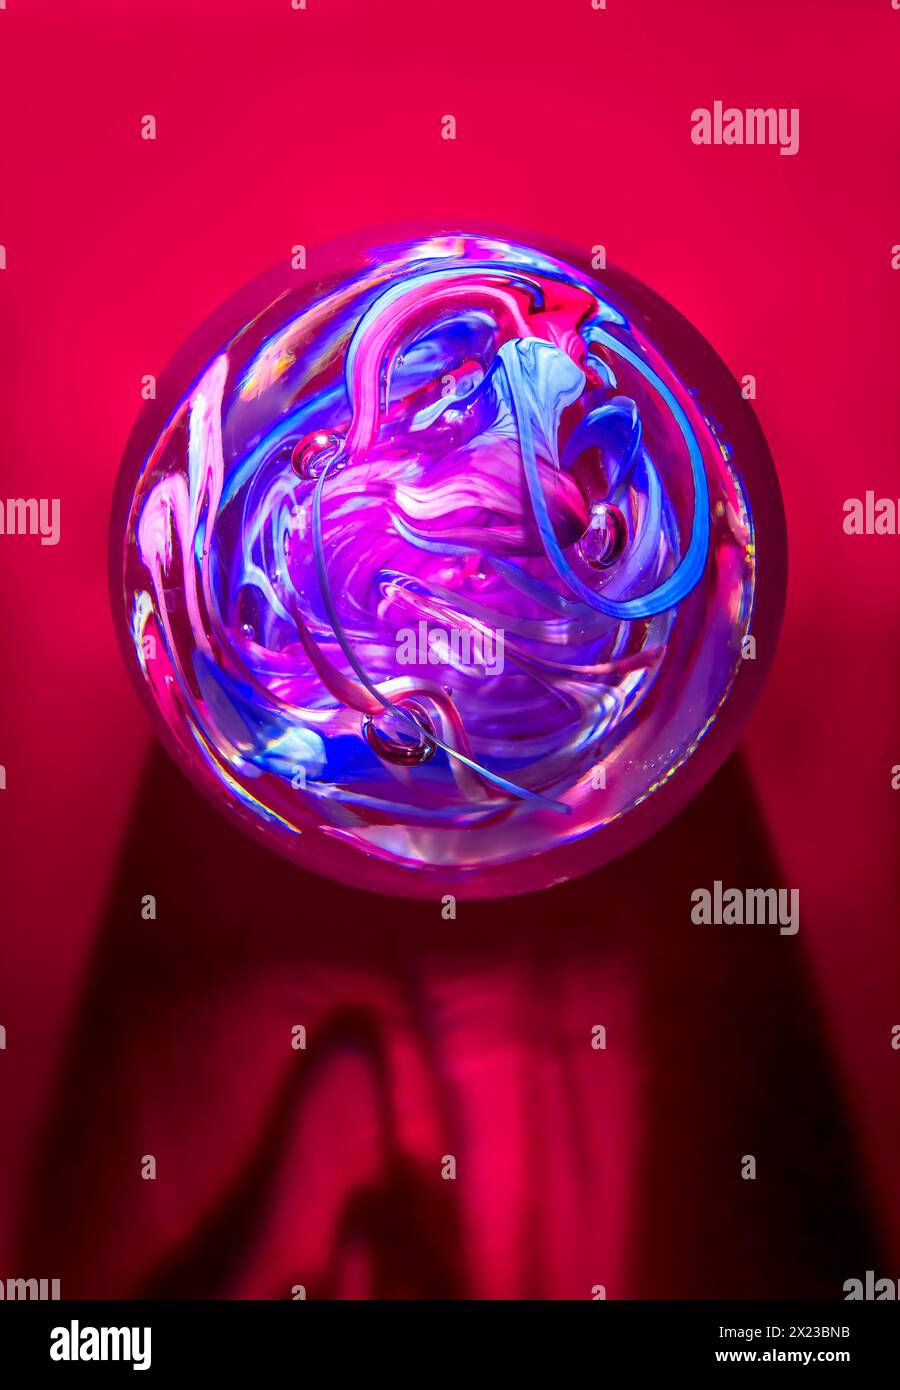 Colourful Glass Crystal Paperweight on a red background, with swirl pattern in a round ball shape. Concept of crystal Ball and fortune telling Stock Photo